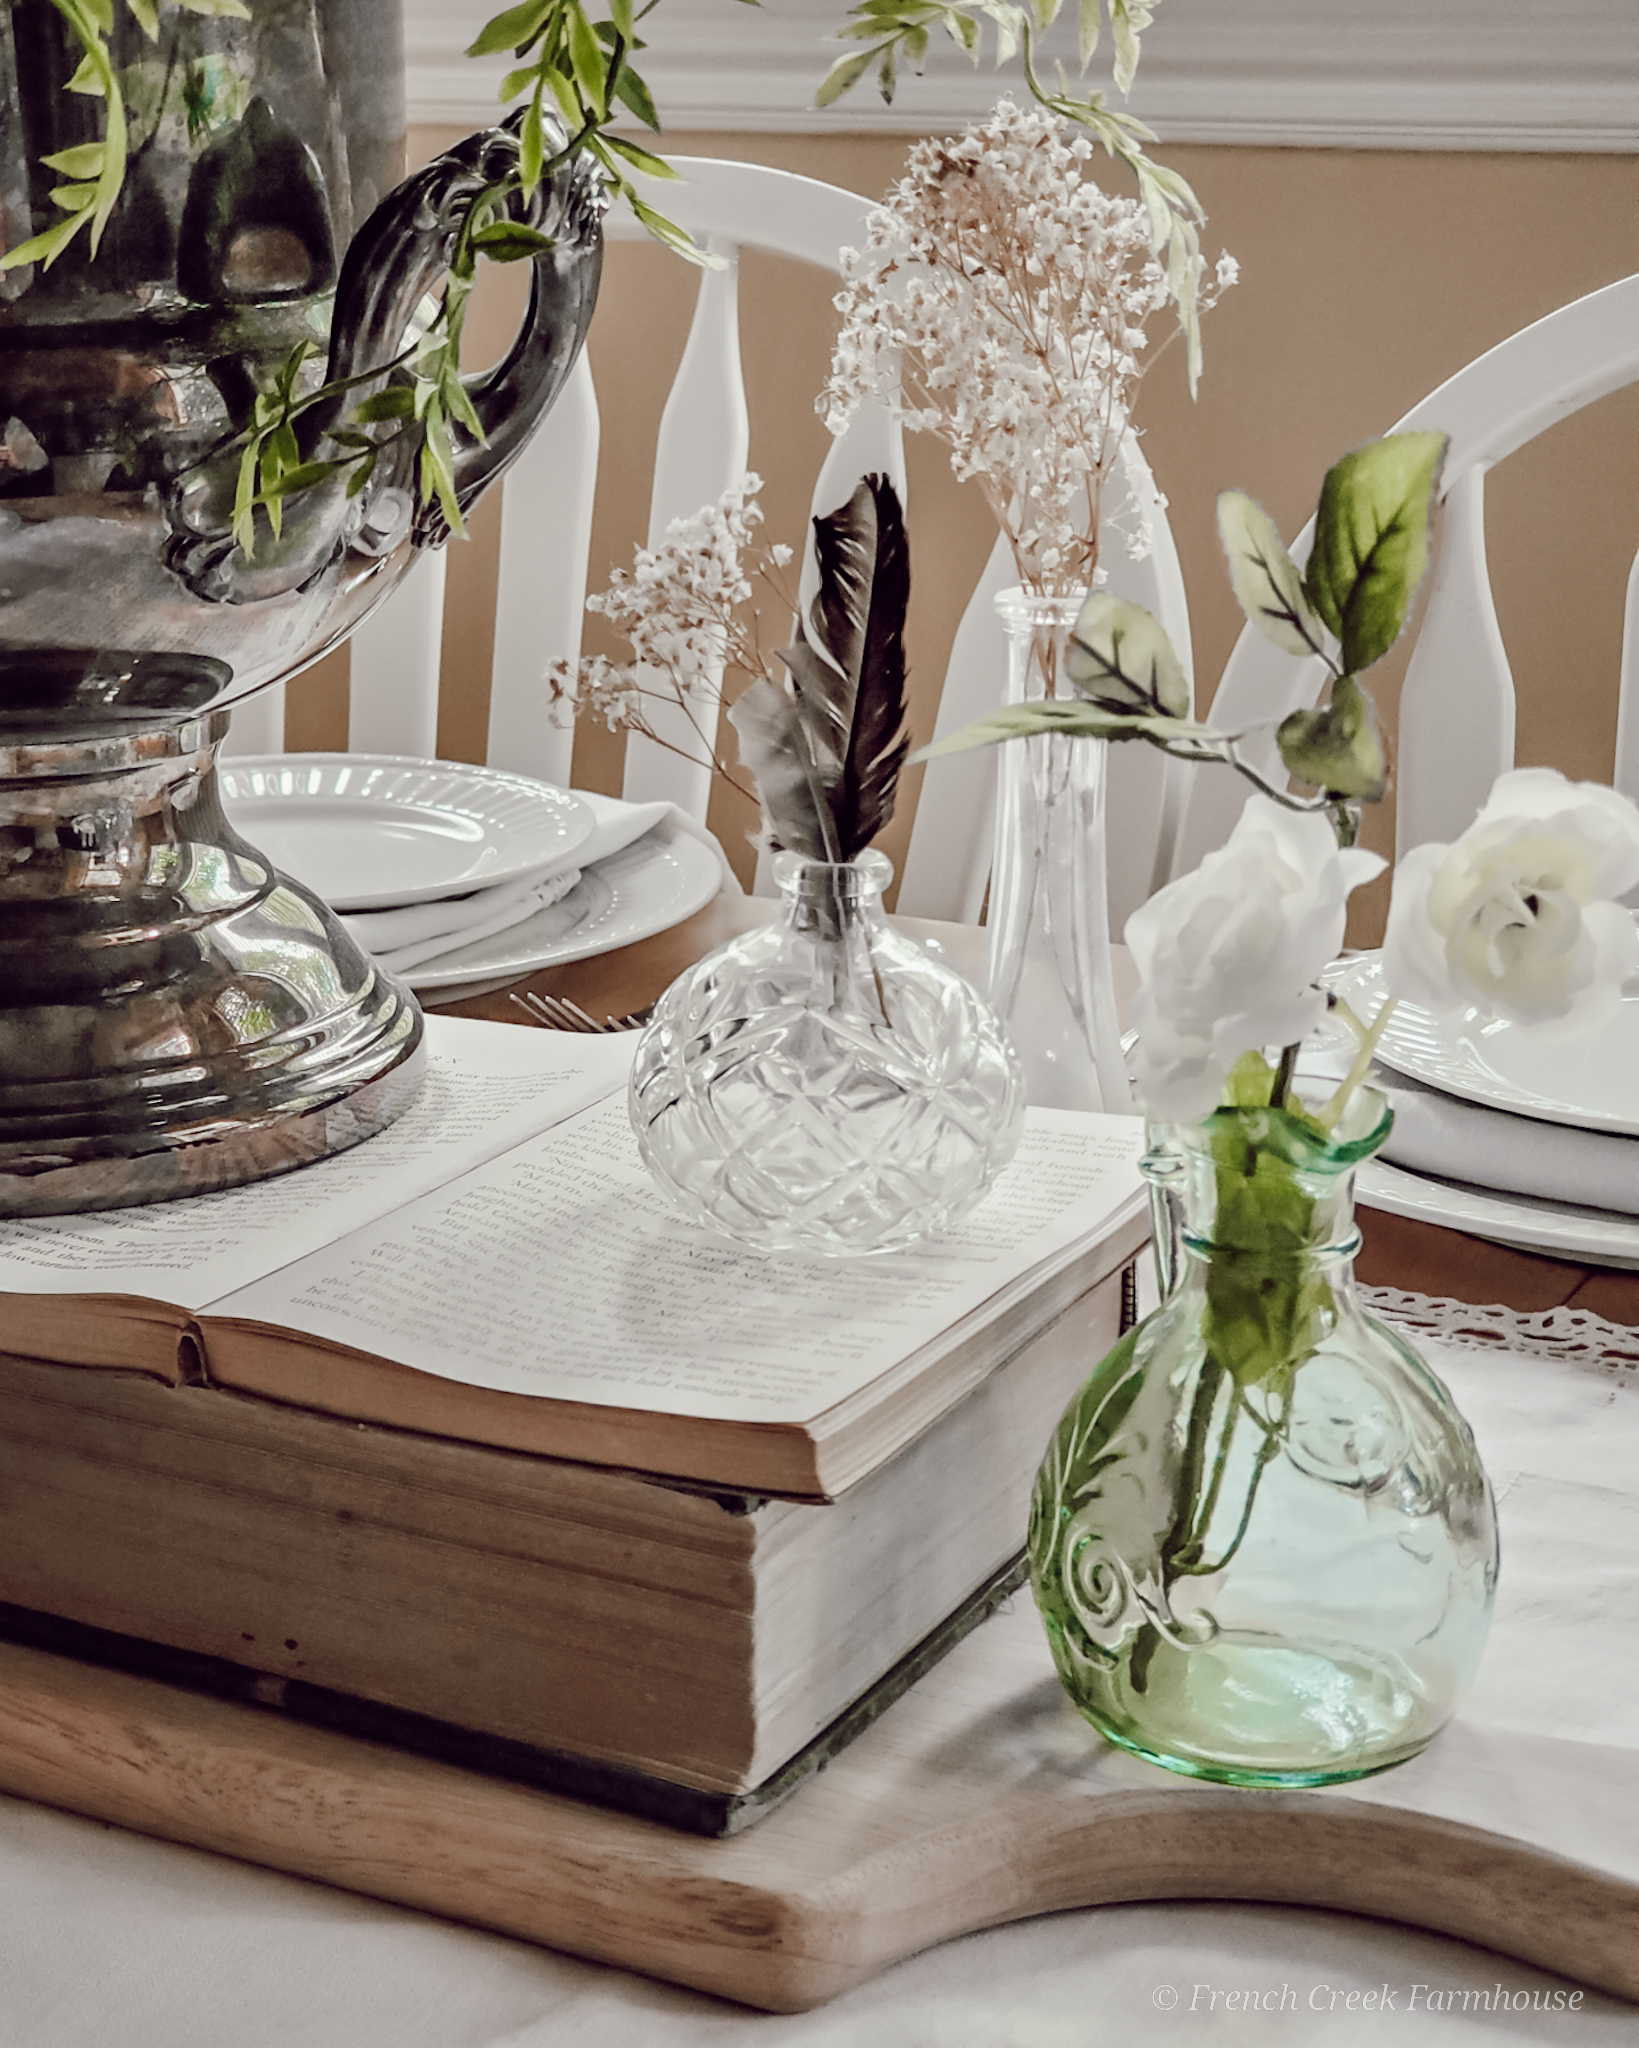 Small vintage vases and old books used for a romantic centerpiece